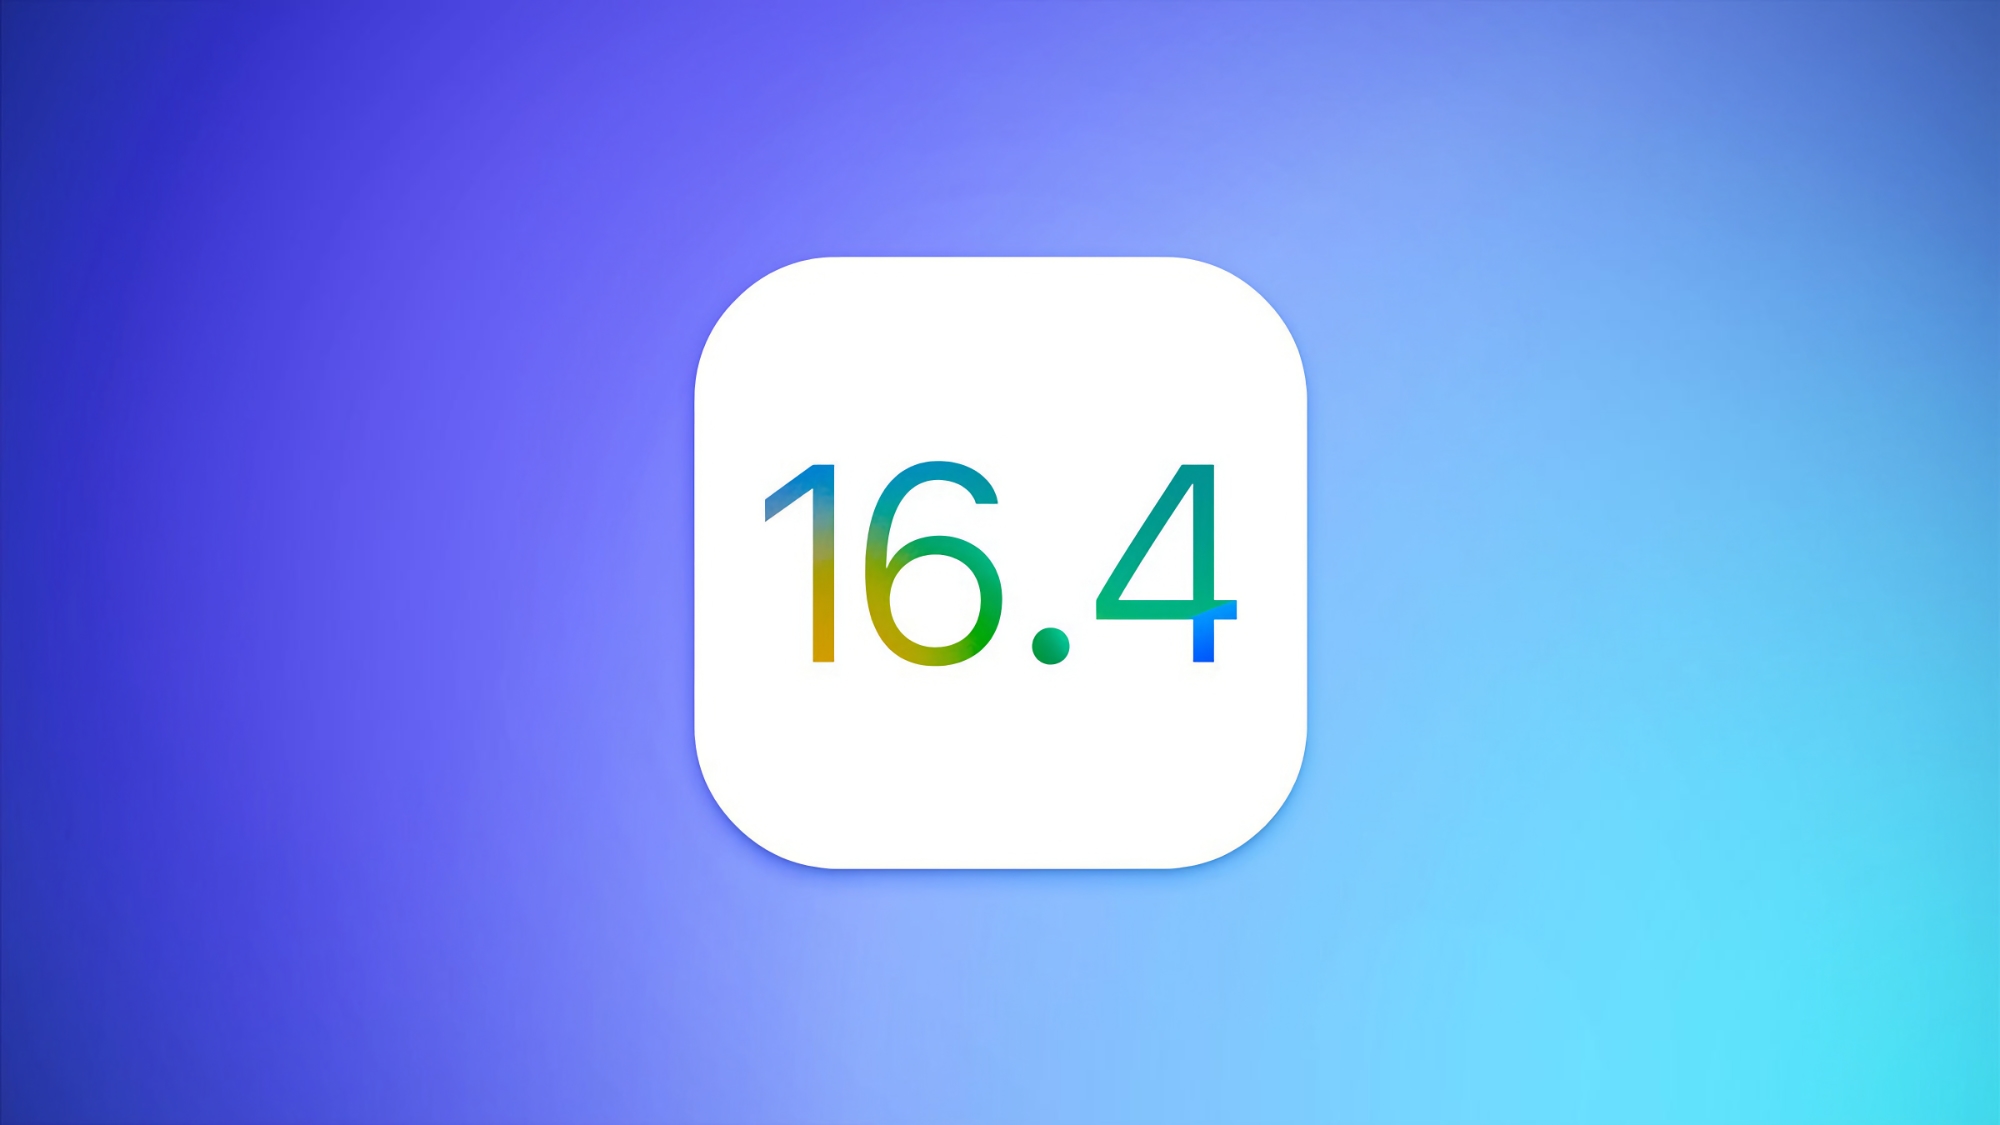 Apple releases fourth beta version of iOS 16.4 and iPadOS 16.4